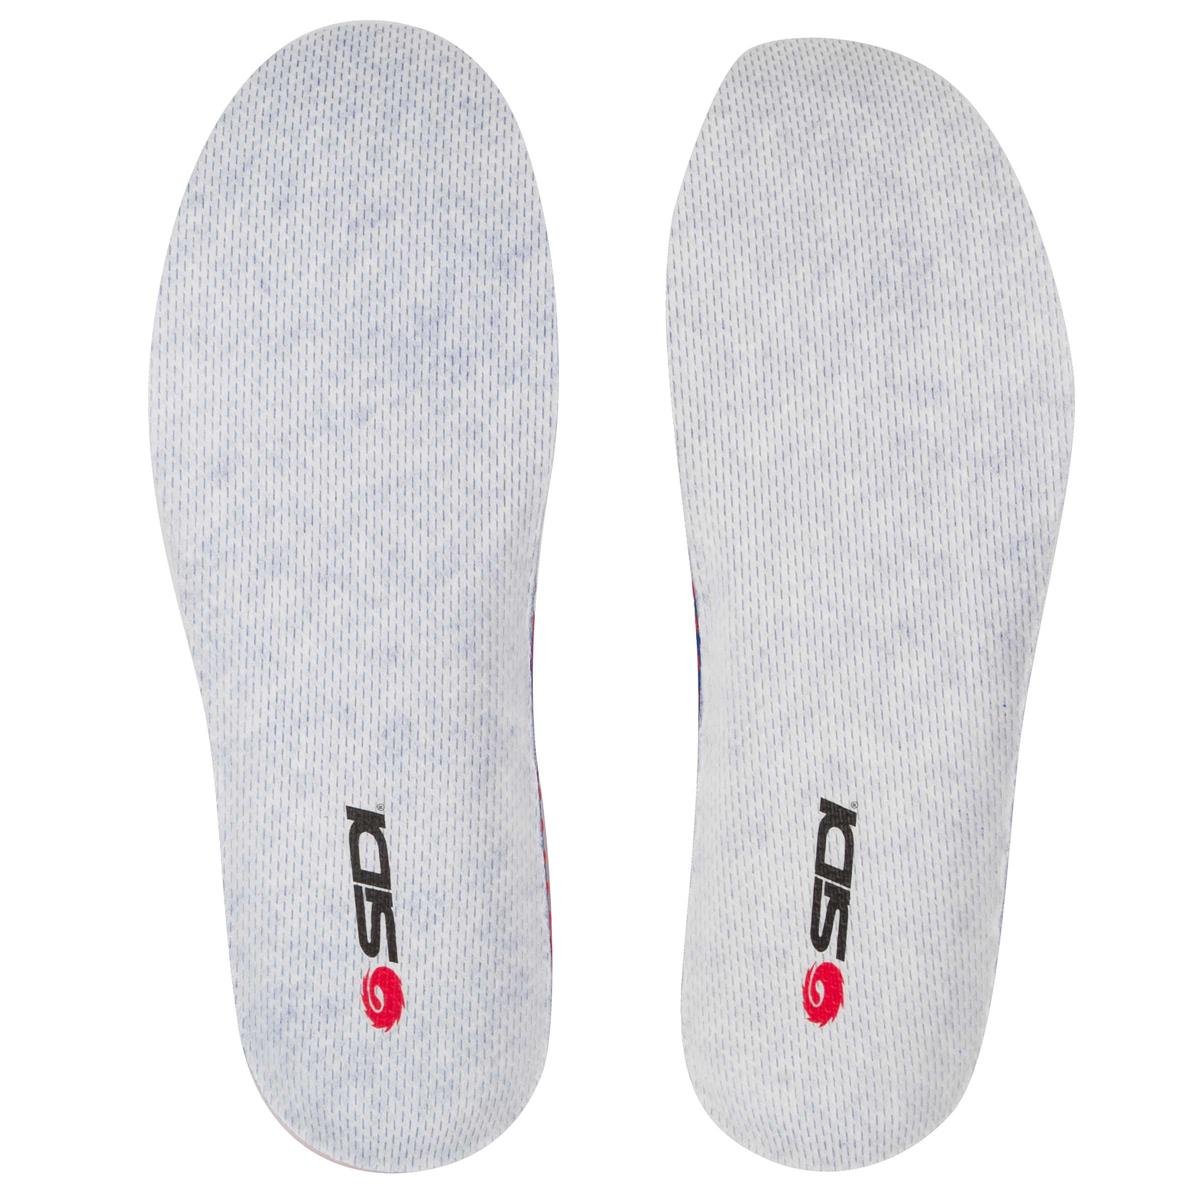 Sidi Replacement Insole Spacer Arch Support White